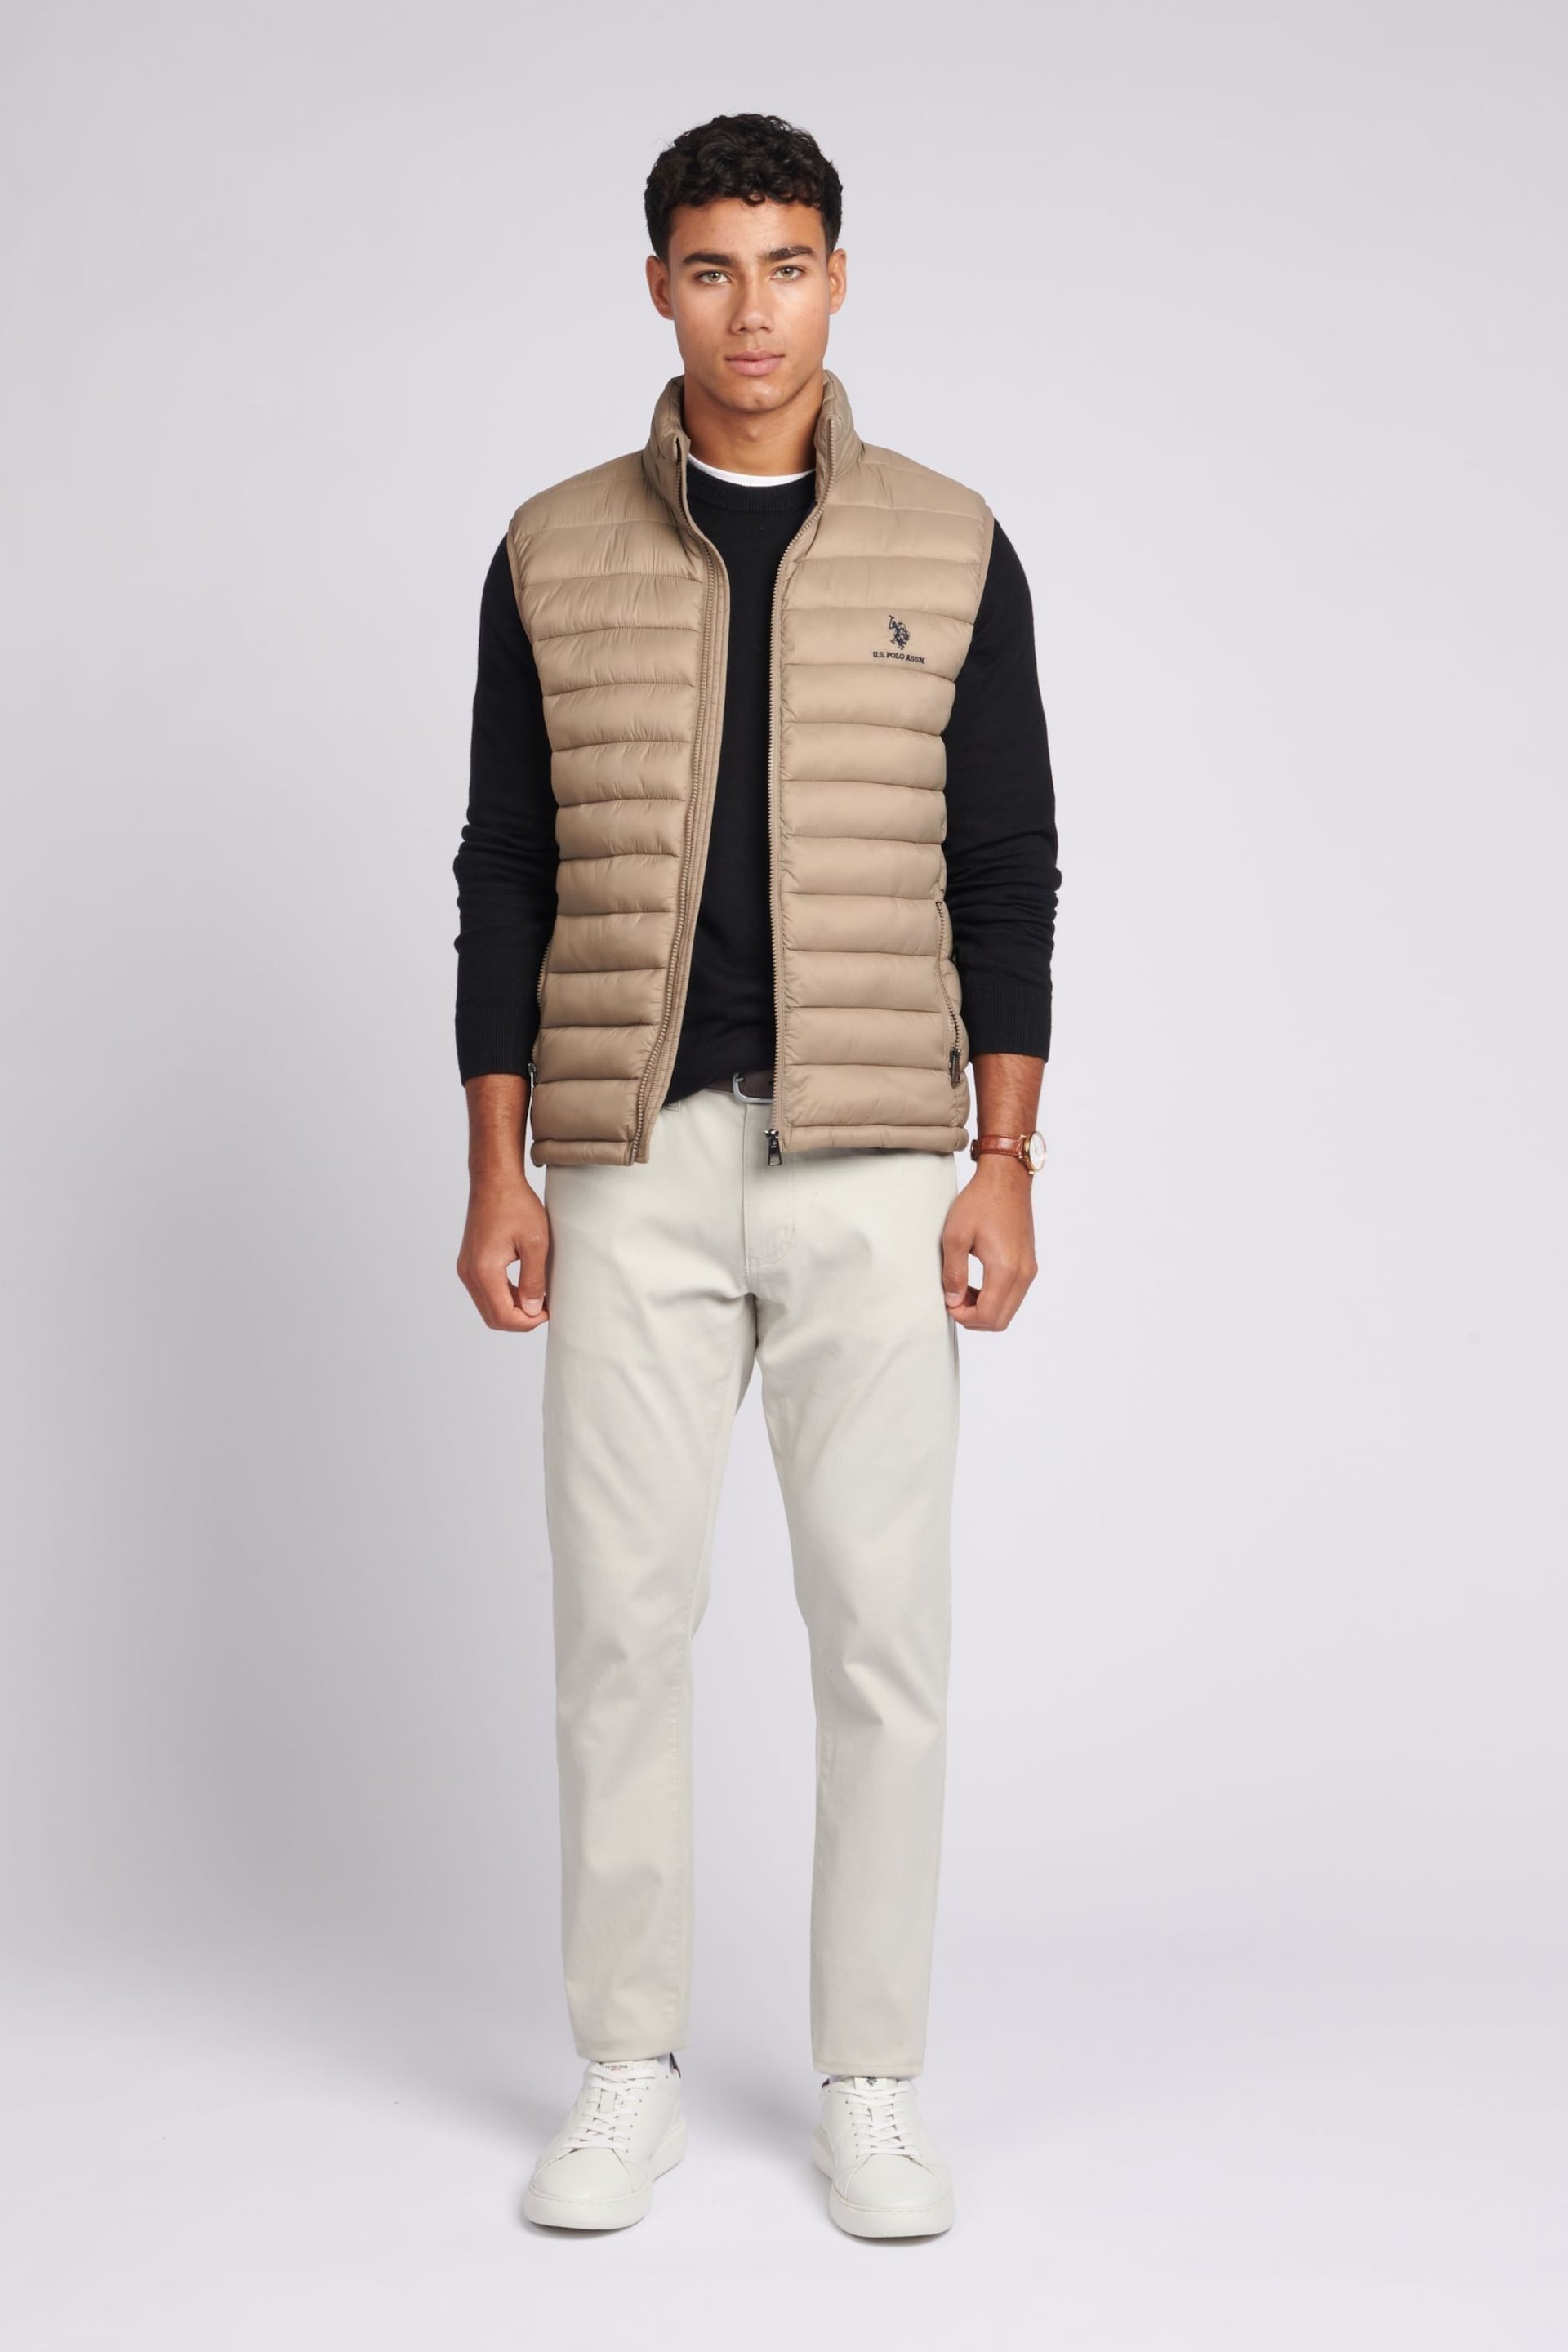 U.S. Polo Assn. Mens Grey Lightweight Quilted Gilet - Image 3 of 7